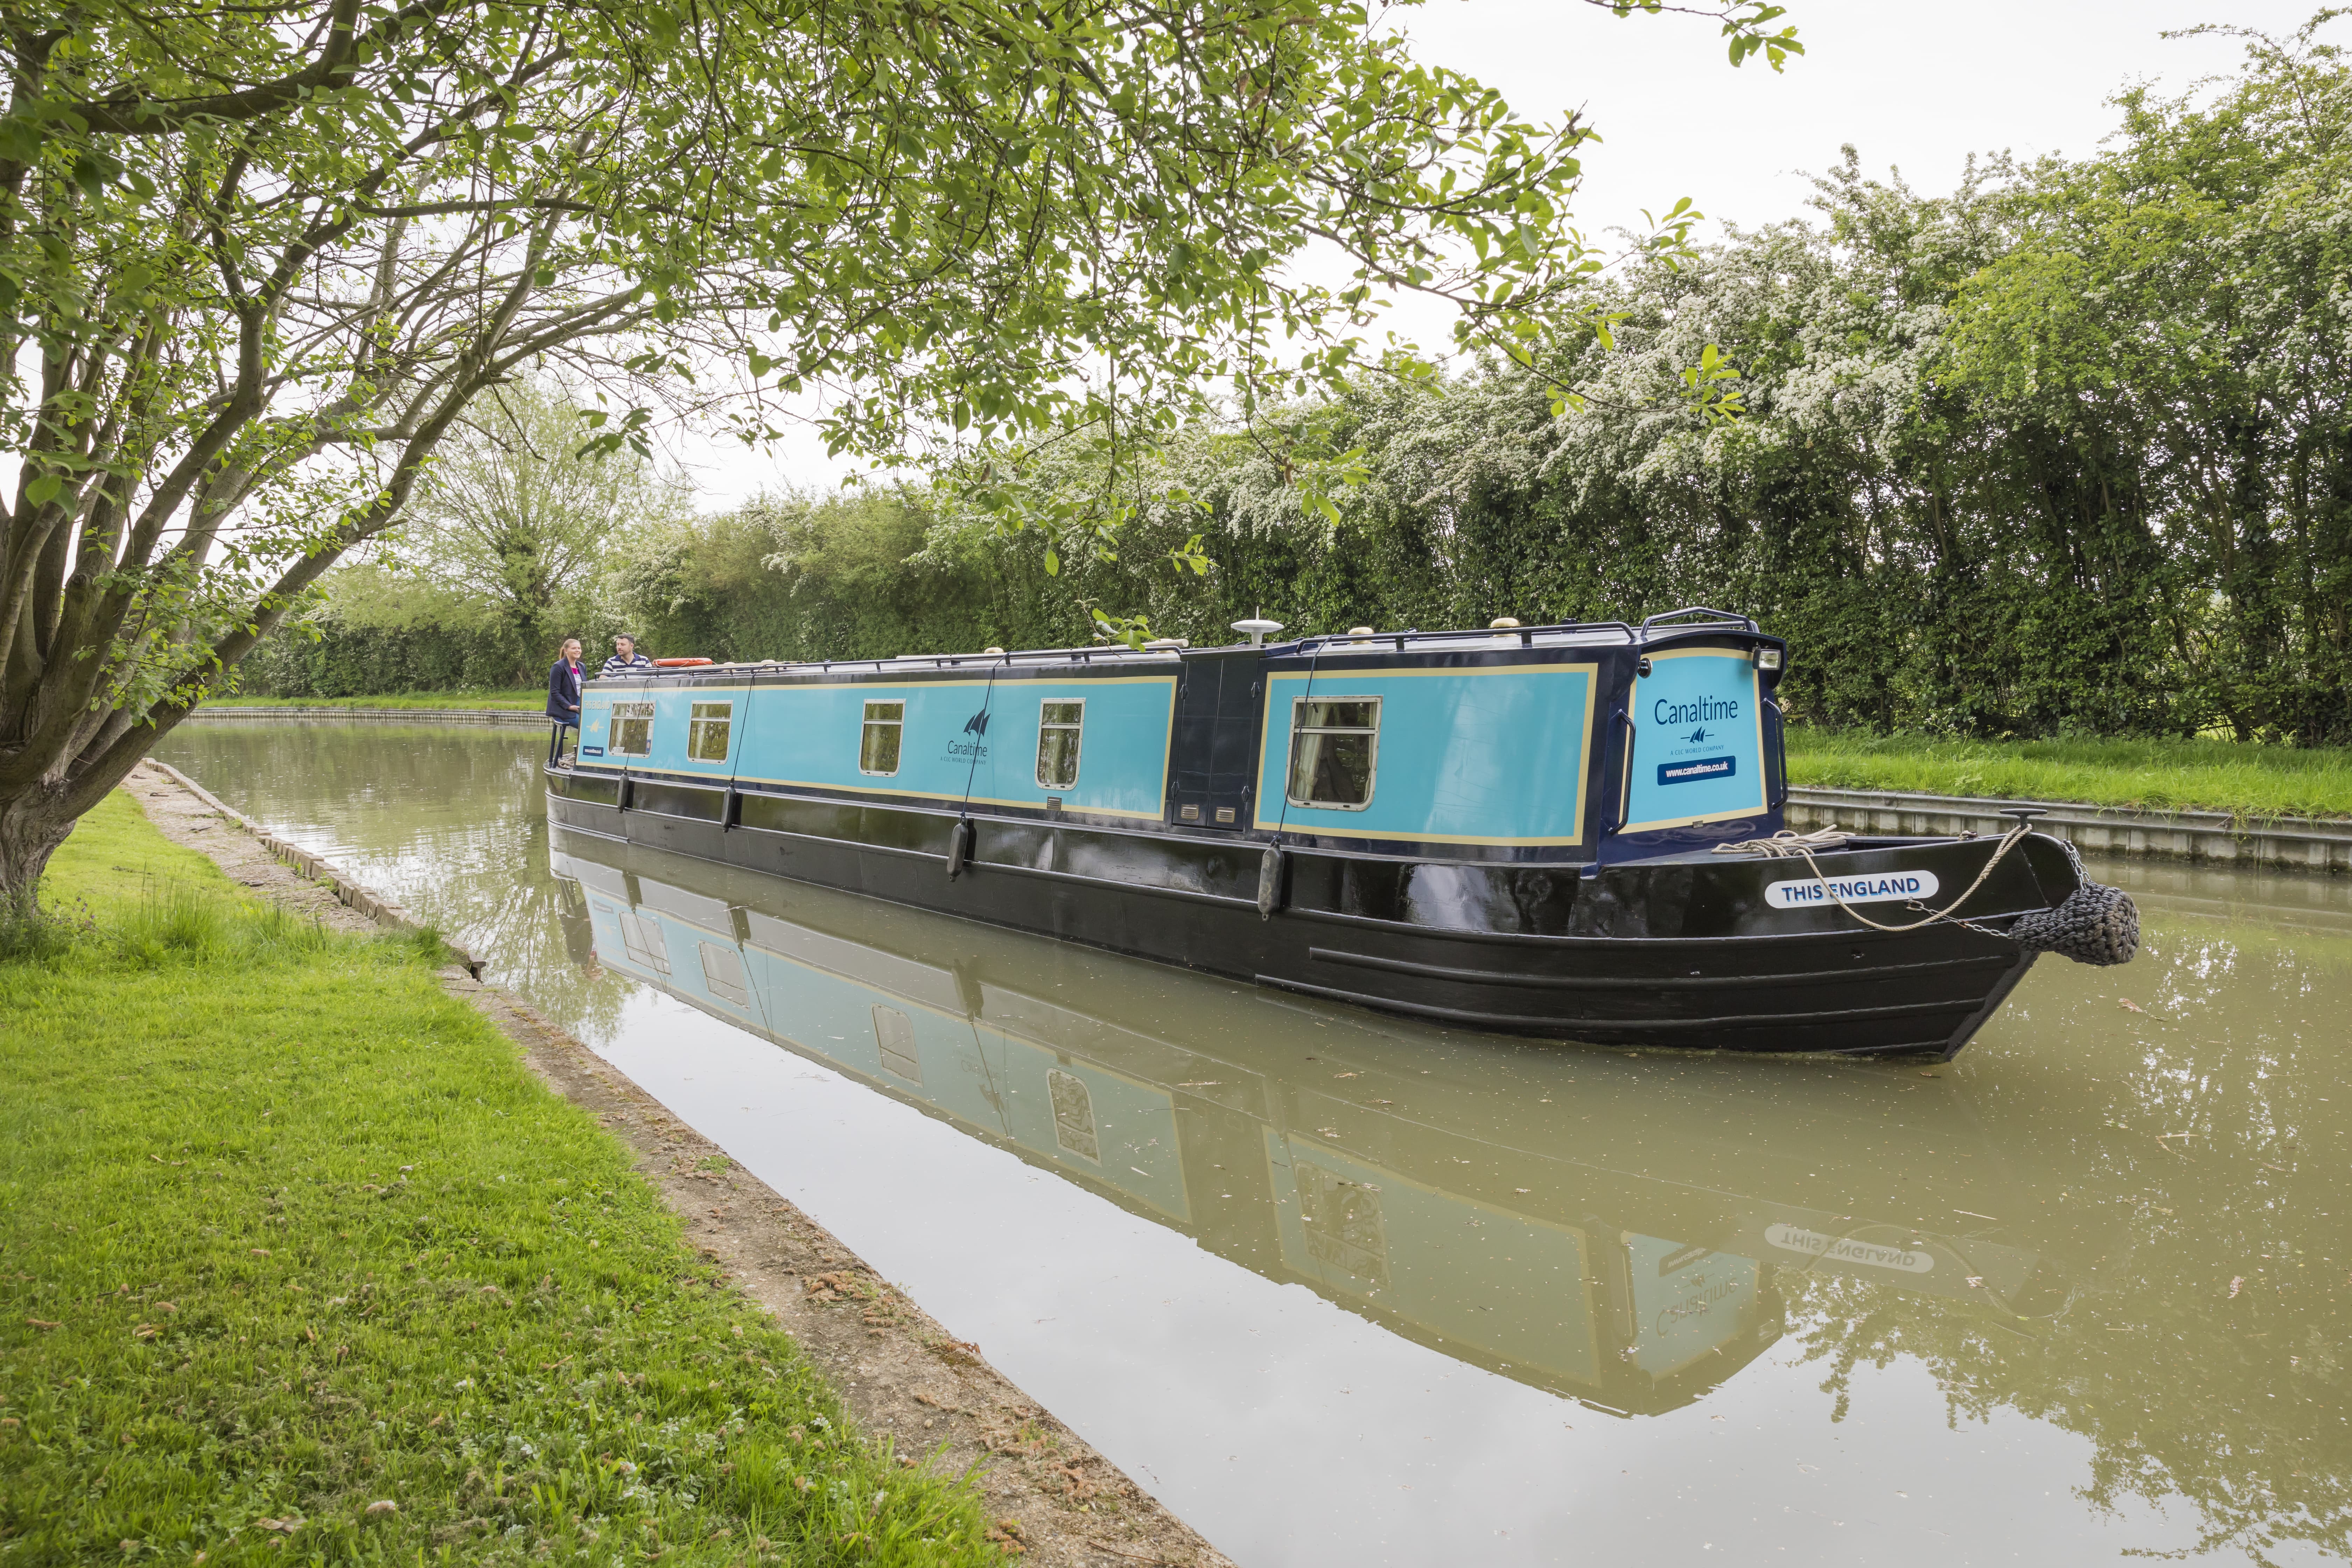 The CLC6 class canal boat